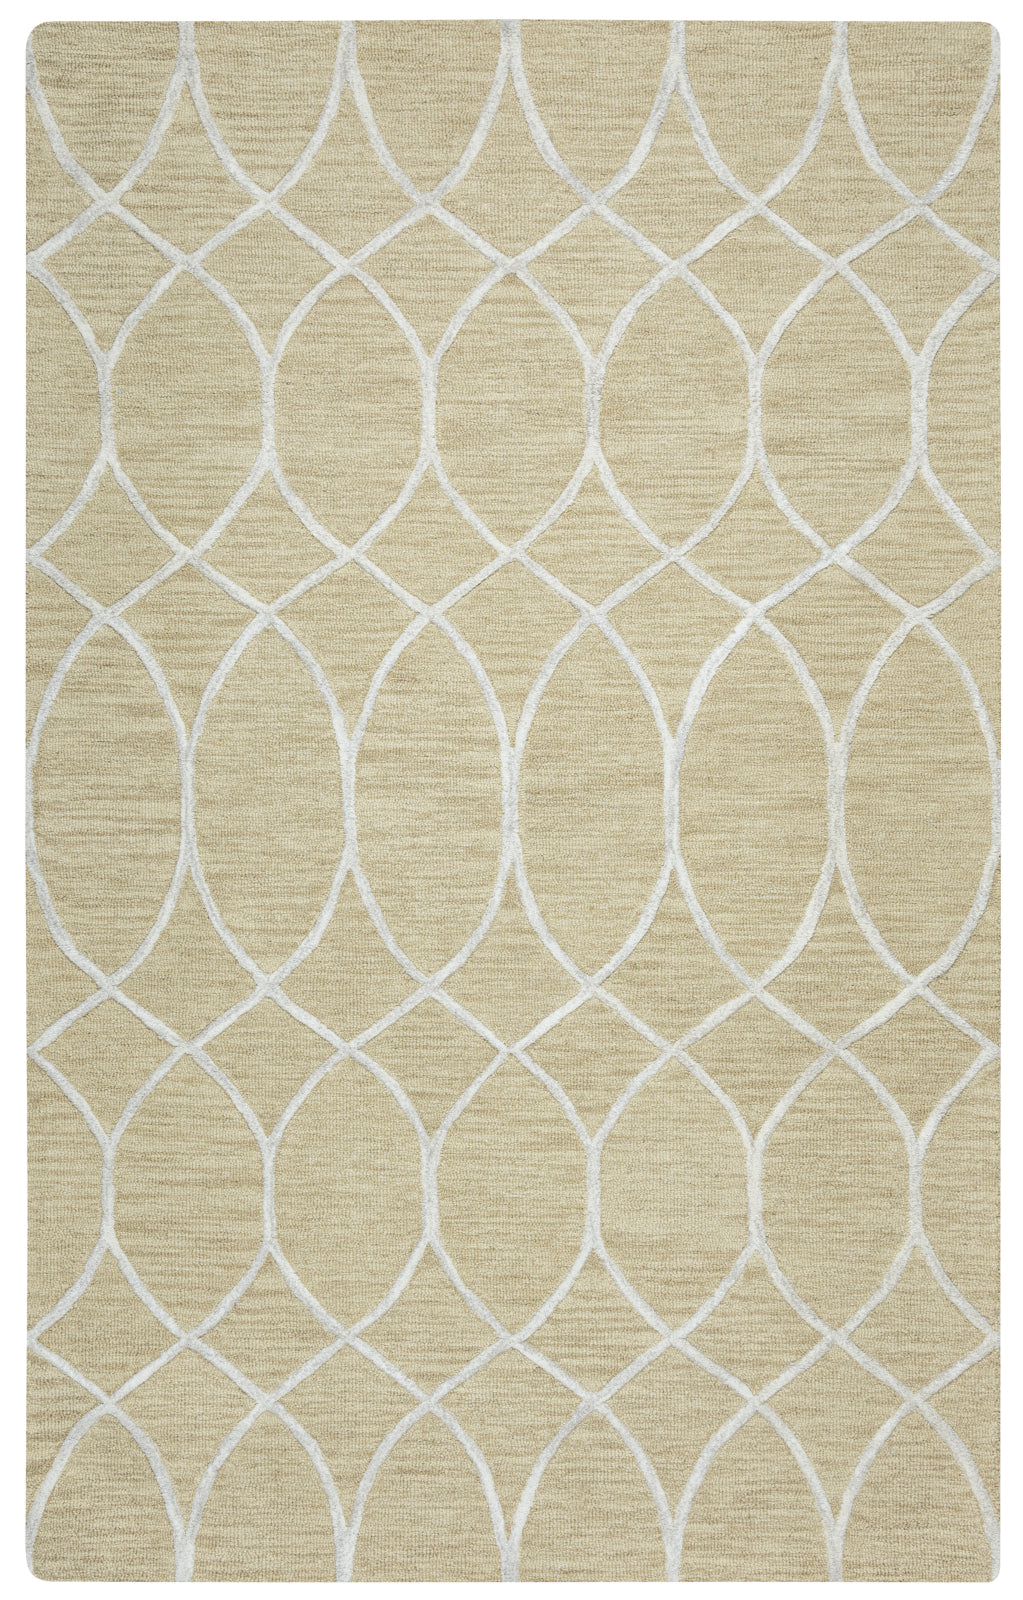 Rizzy Caterine CE9488 Beige Area Rug main image